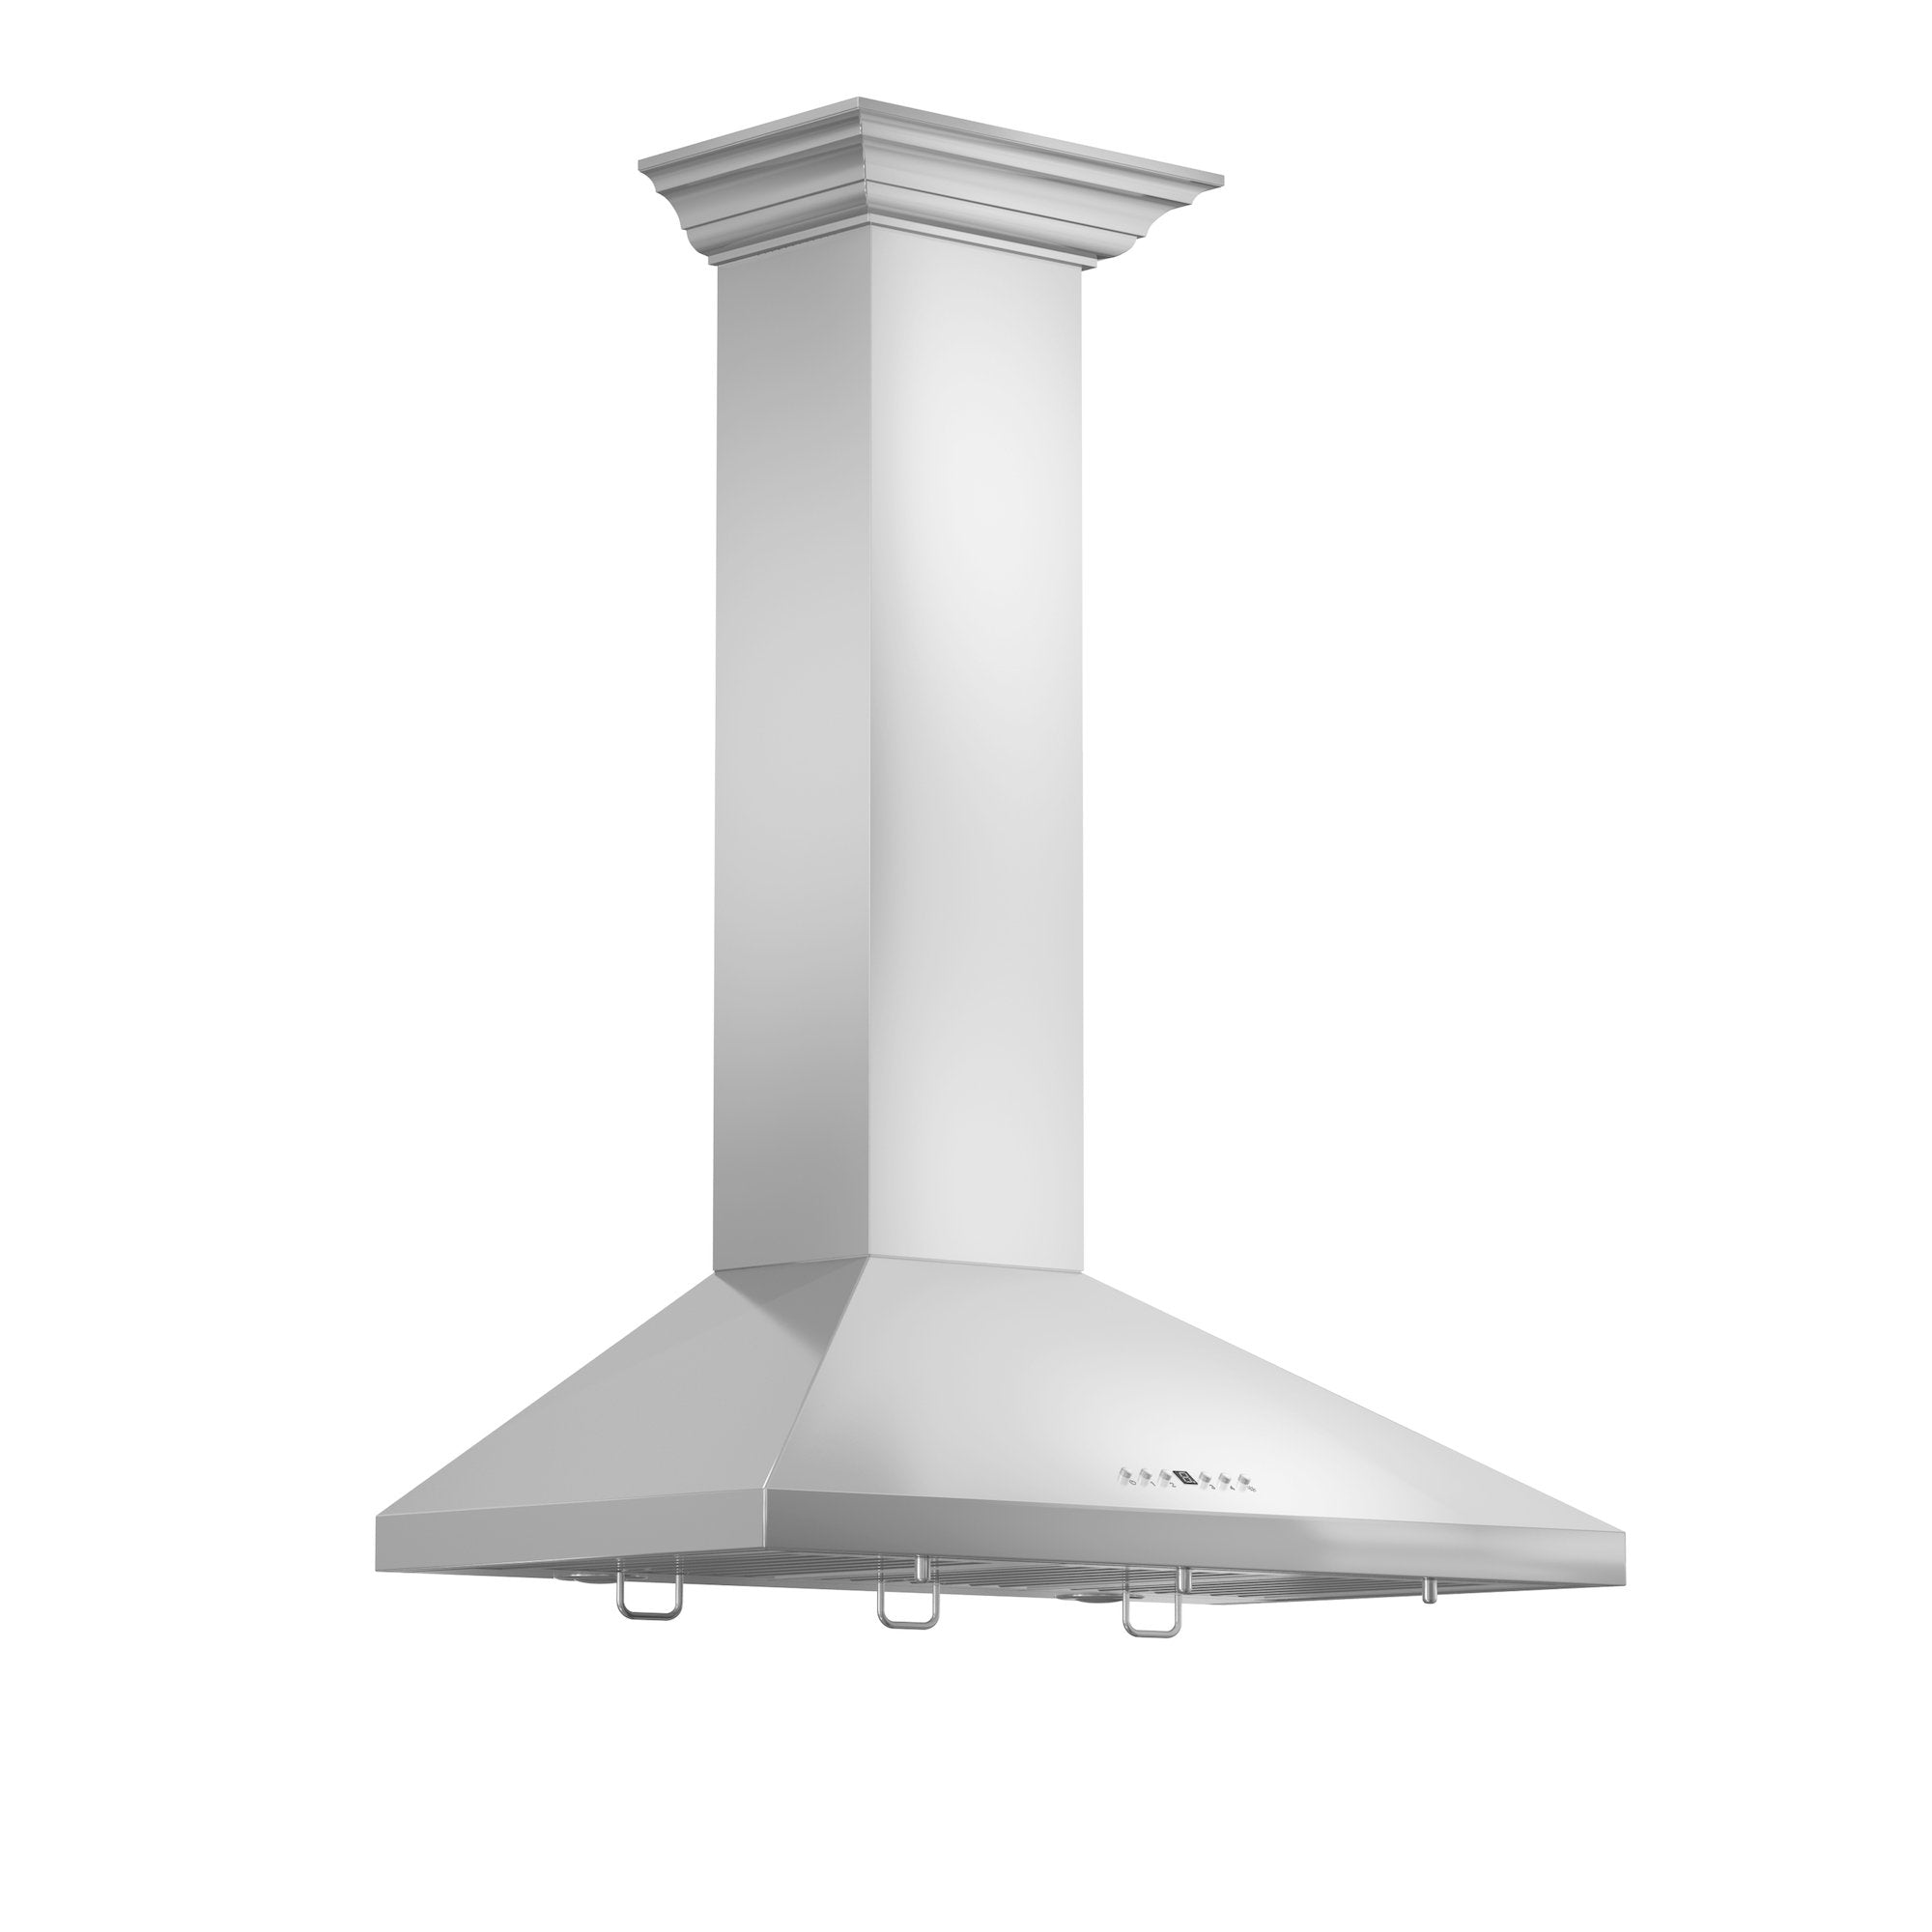 ZLINE Convertible Vent Wall Mount Range Hood in Stainless Steel with Crown Molding - KL2CRN